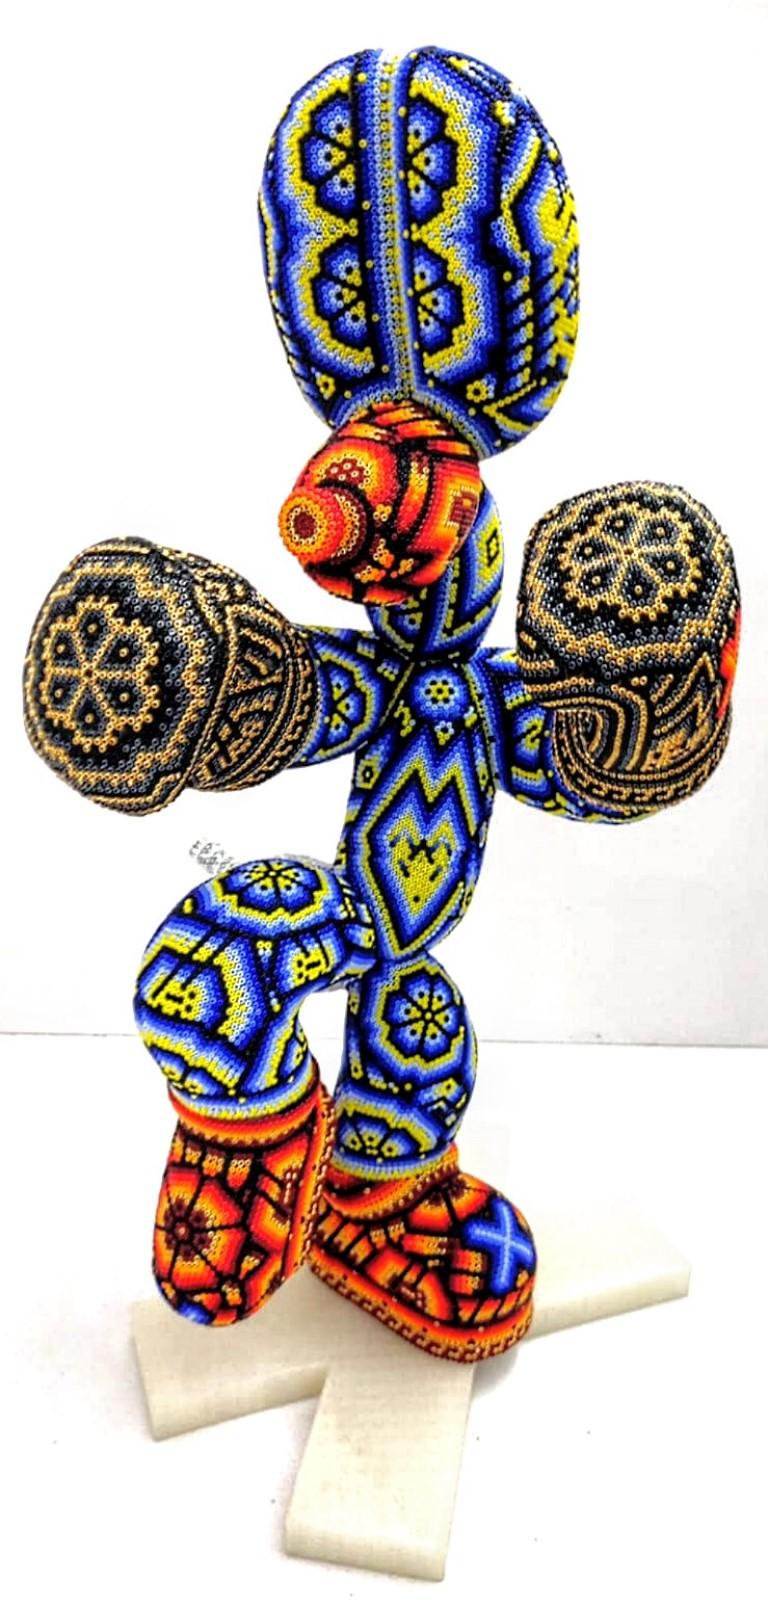 CHROMA aka Rick Wolfryd  Abstract Sculpture - "Boxer Boxing" Mini from Huichol ALTERATIONS Series